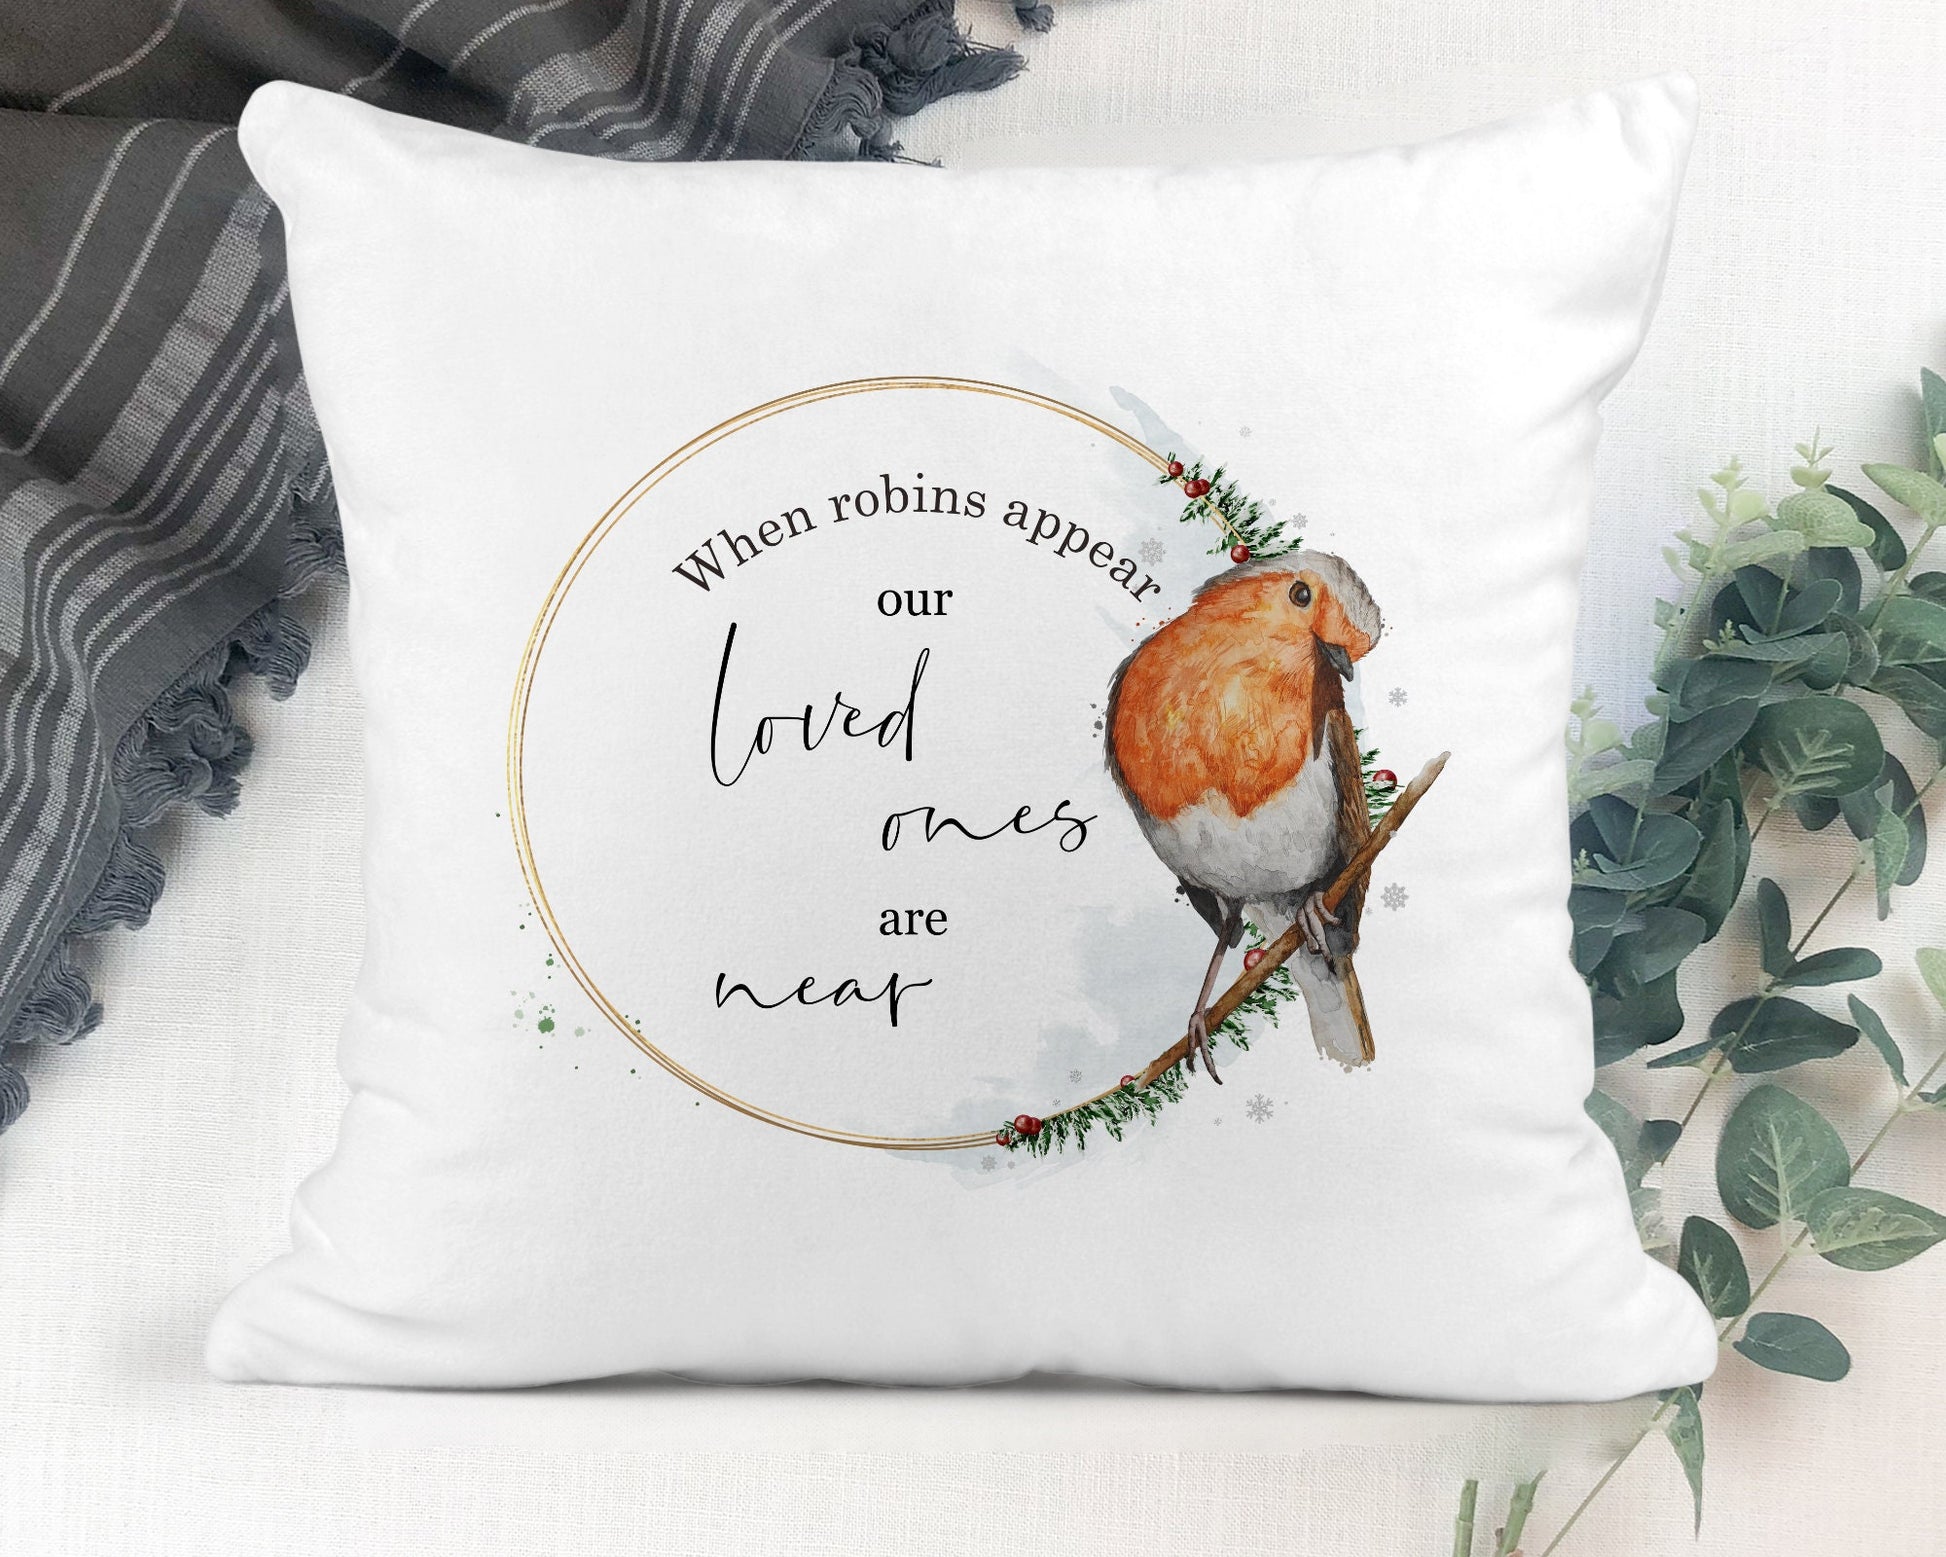 Square cushion with inner, red robin in a wreath, robins appear when loved ones are near